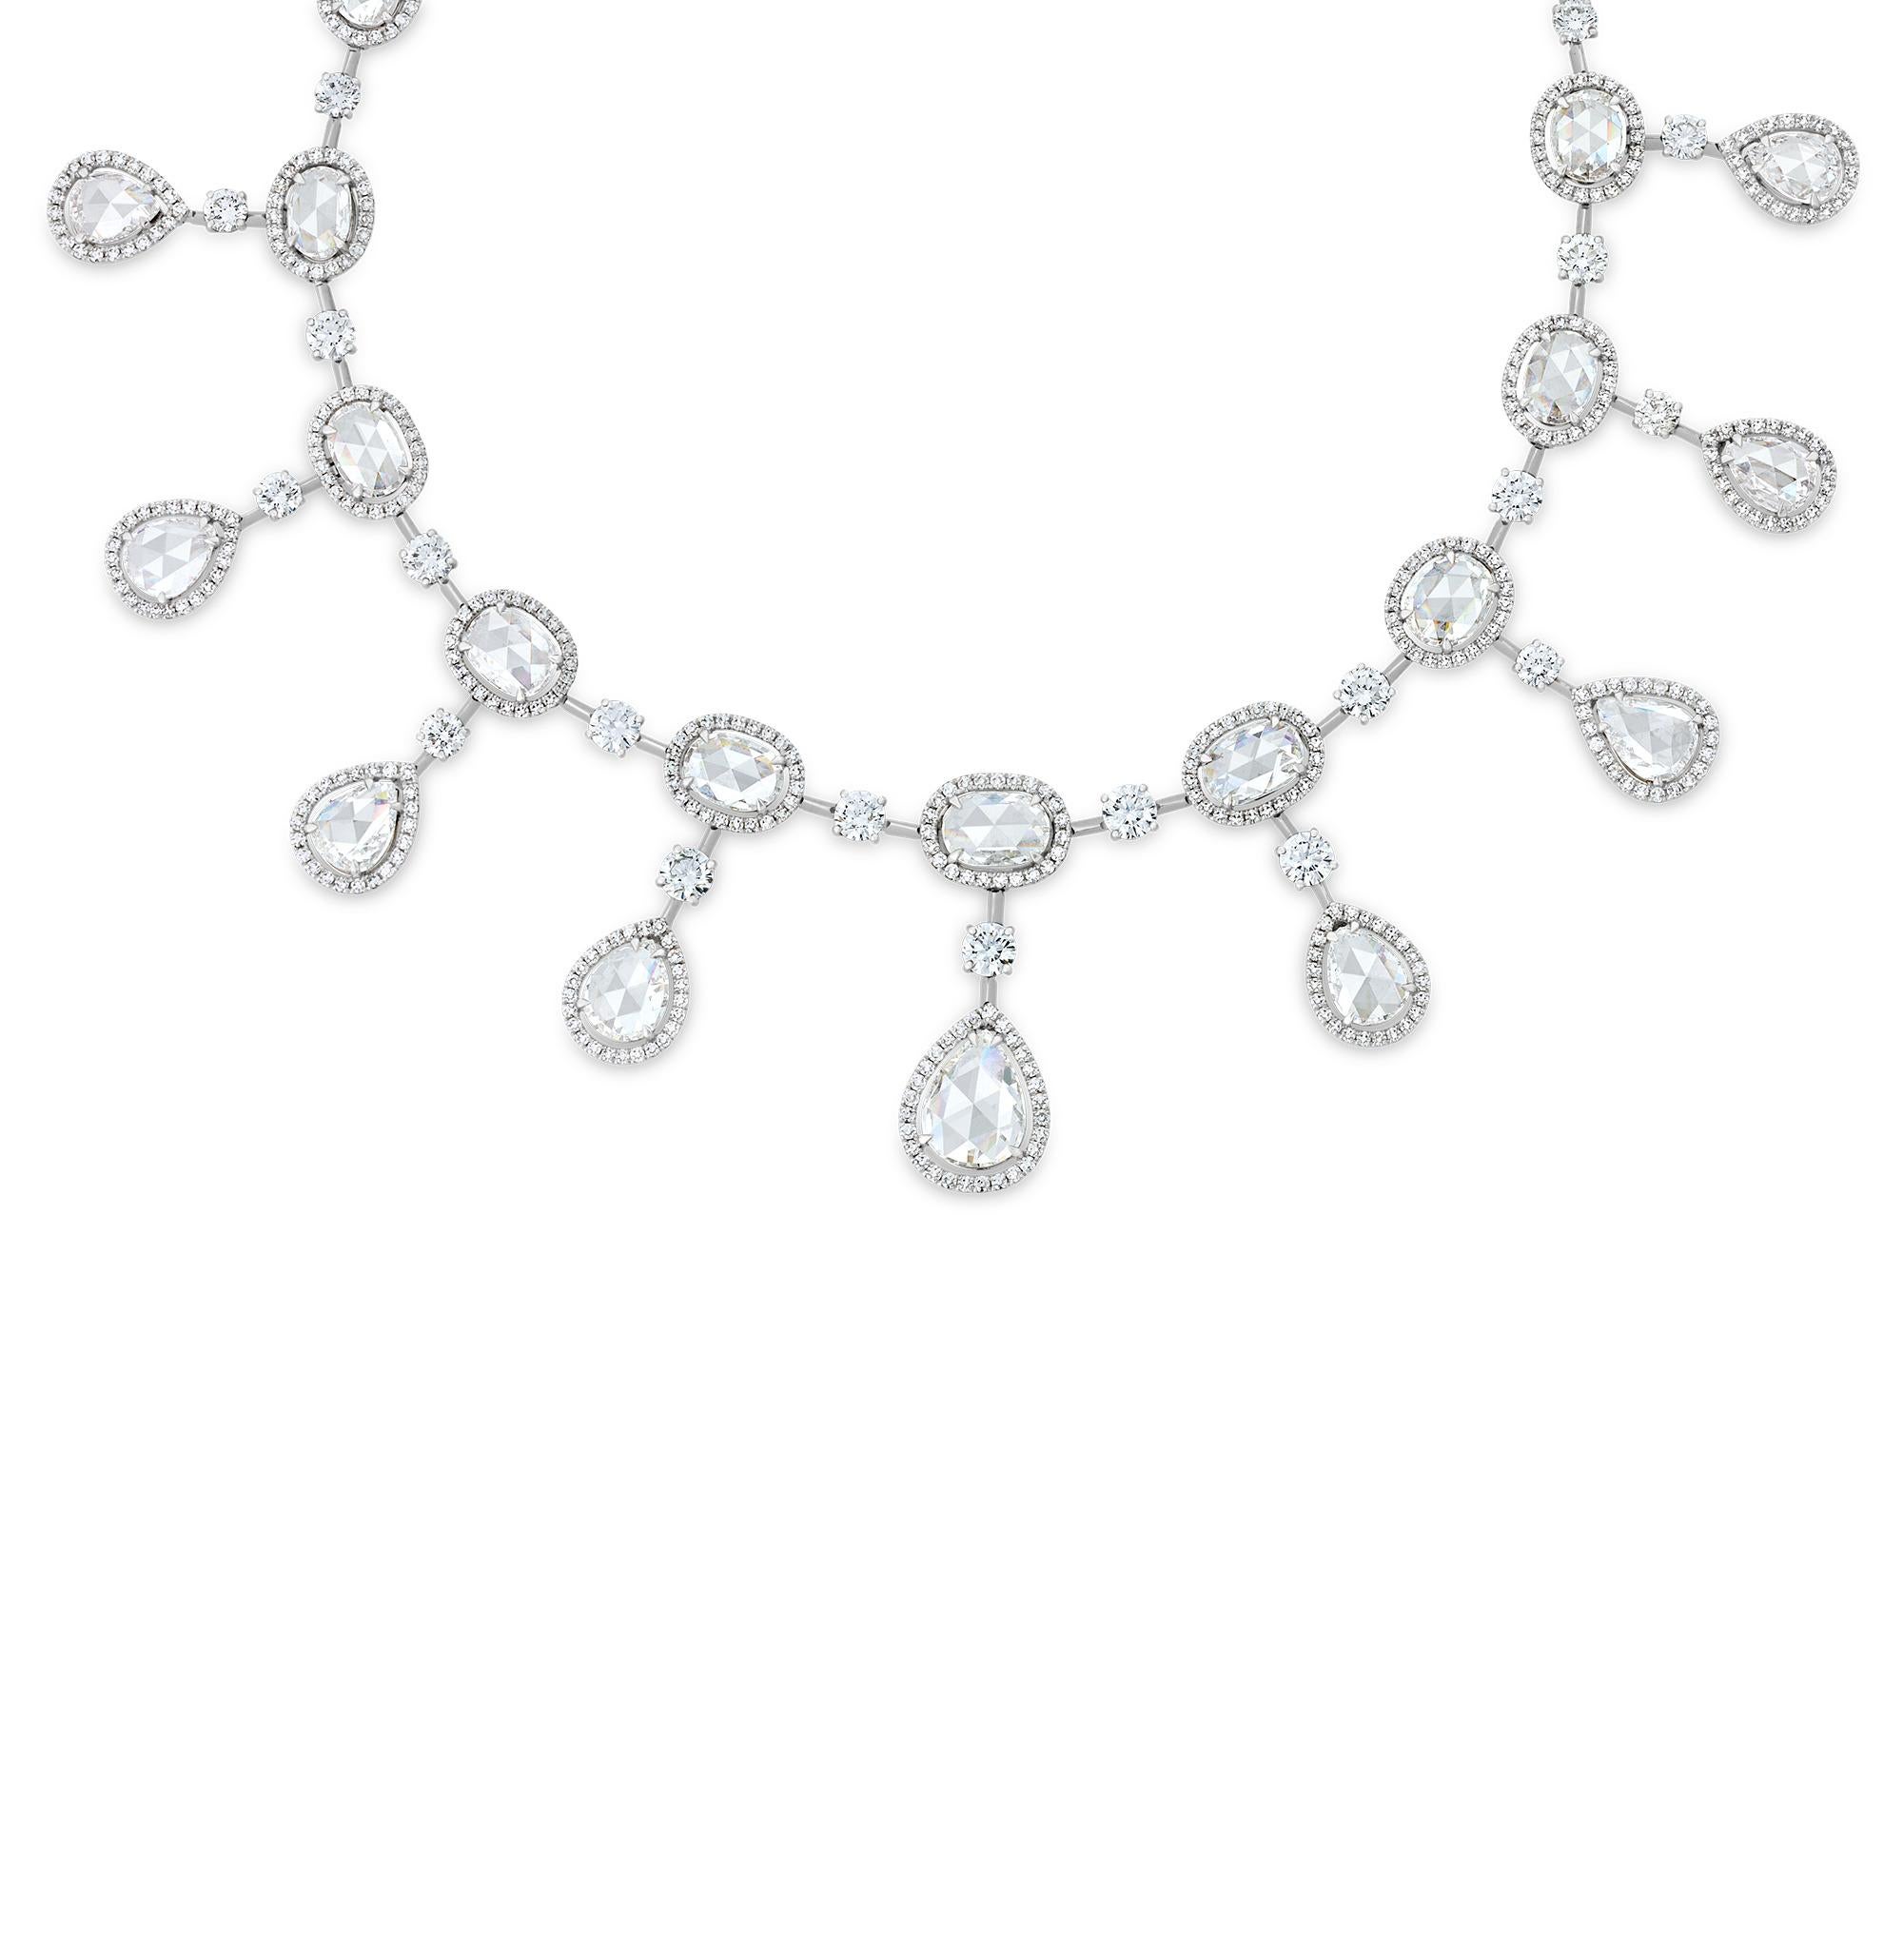 Victorian Rose Cut Diamond Necklace And Earrings, 61.28 Carats For Sale